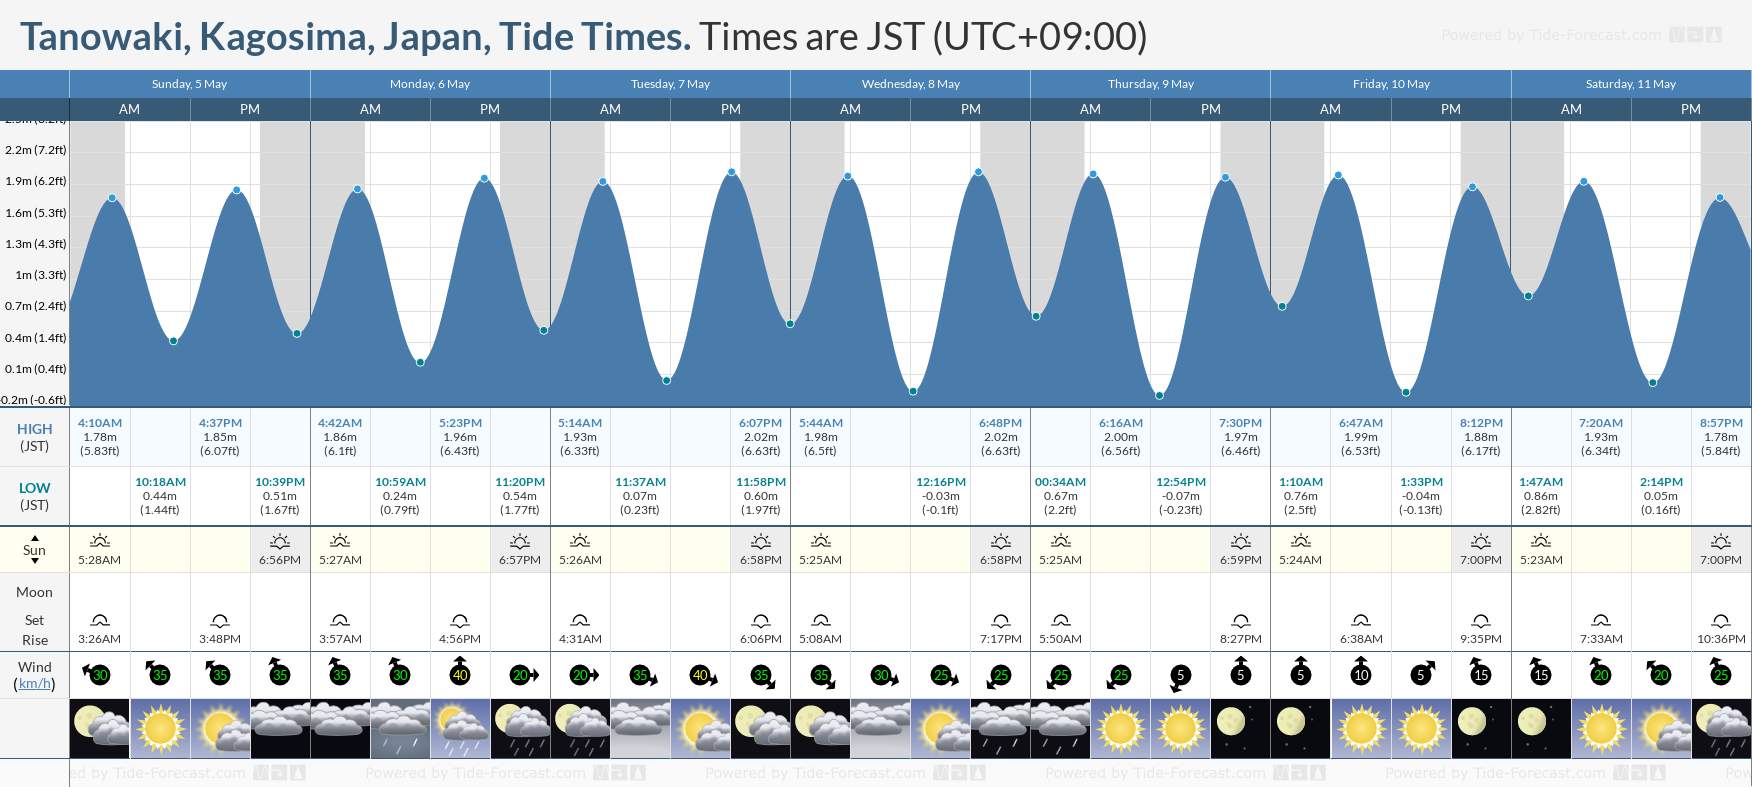 Tanowaki, Kagosima, Japan Tide Chart including high and low tide tide times for the next 7 days